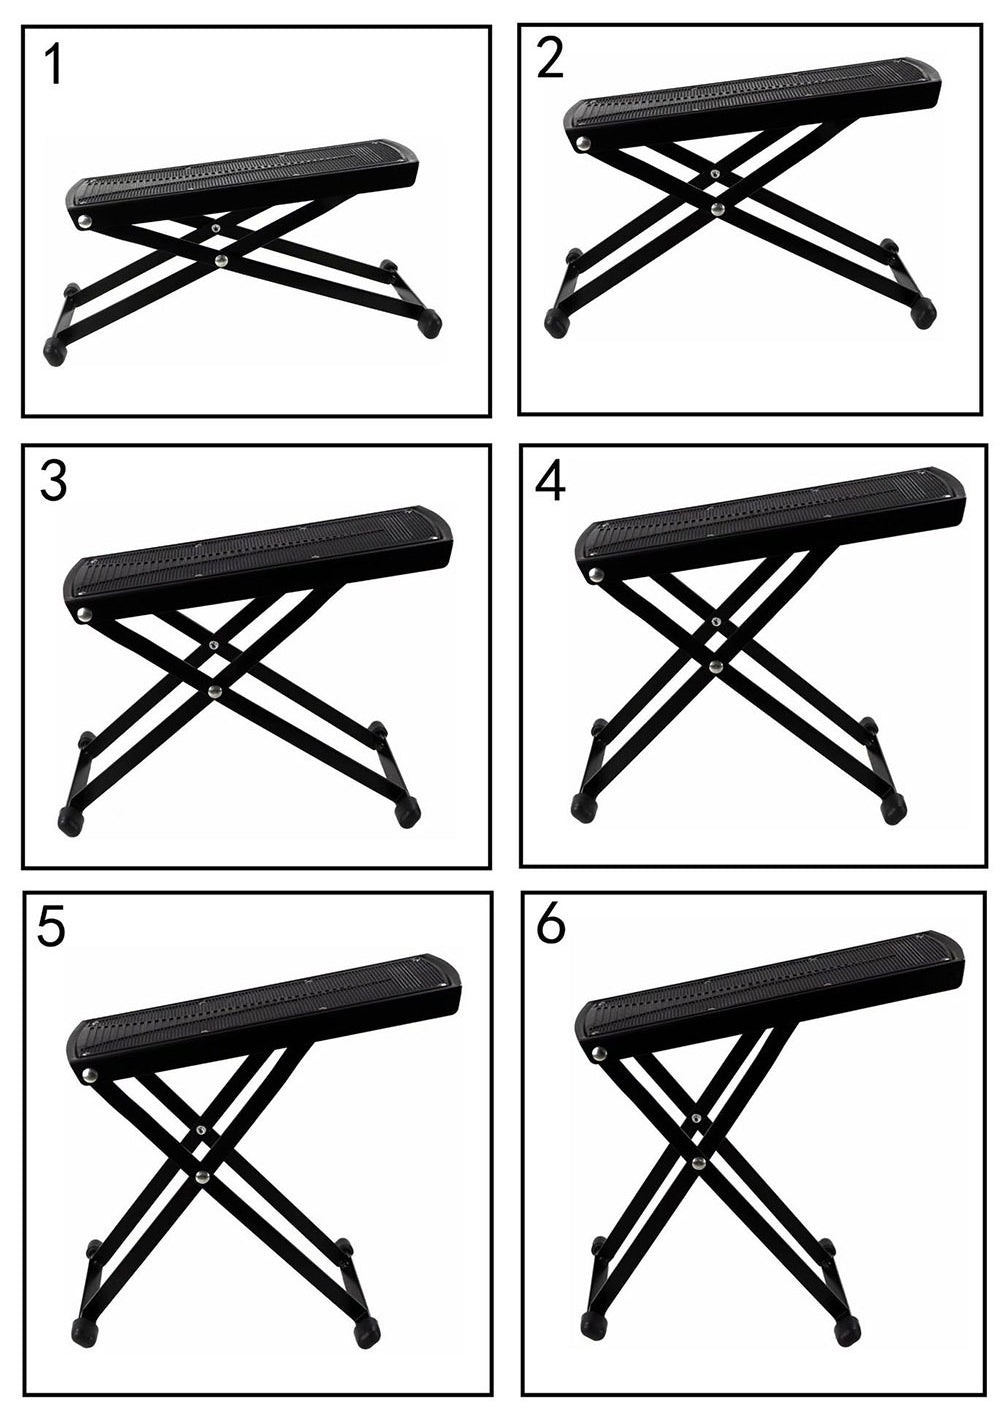 Alba Guitar Beads 6 Stage Foot Rest, Foot Stool for Classical guitar and for Flamenco guitar.